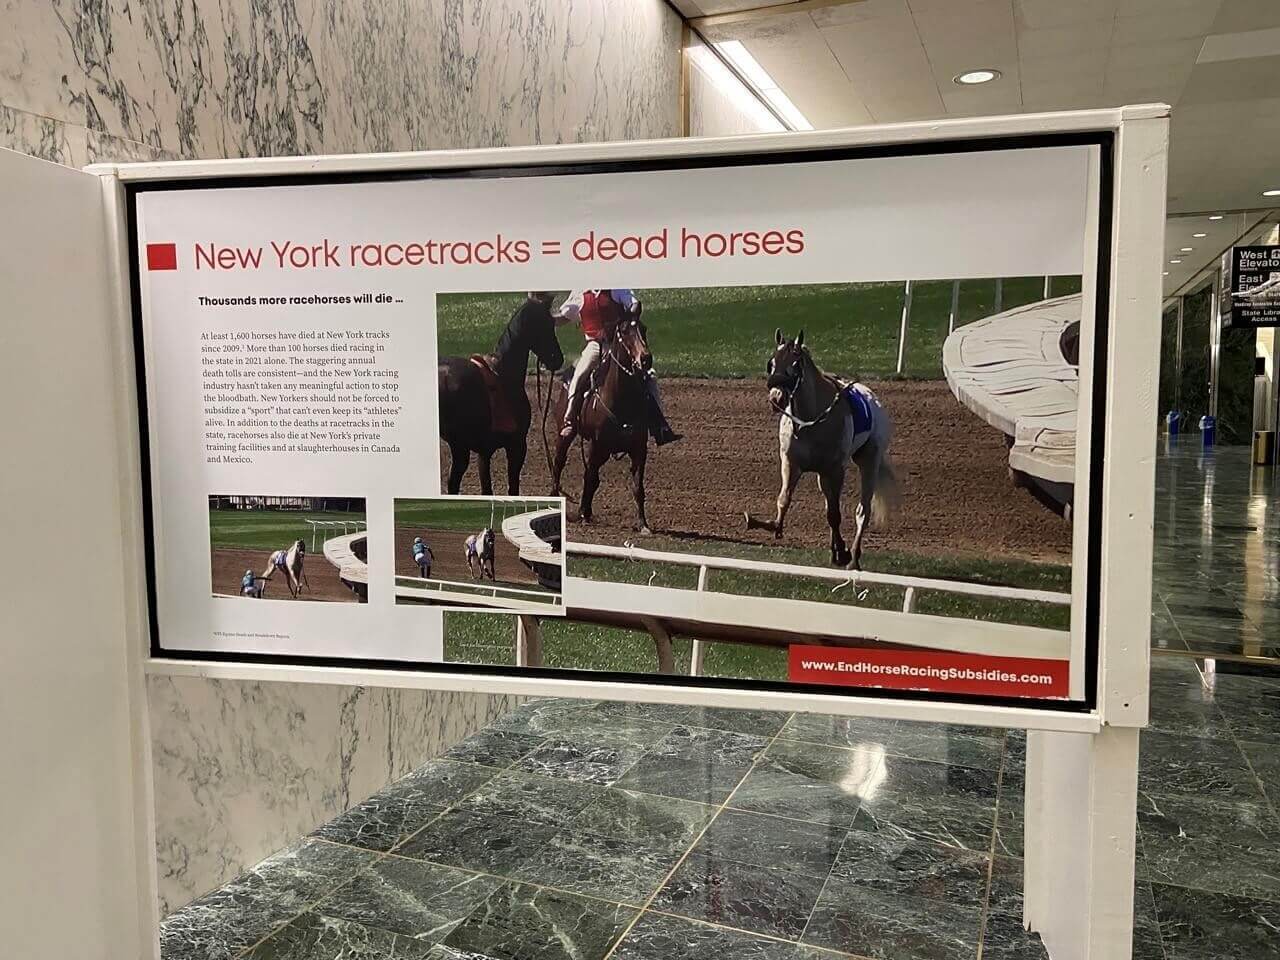 Coalition to End Horse Racing Subsidies panel put up about how New York racetracks lead to dead horses